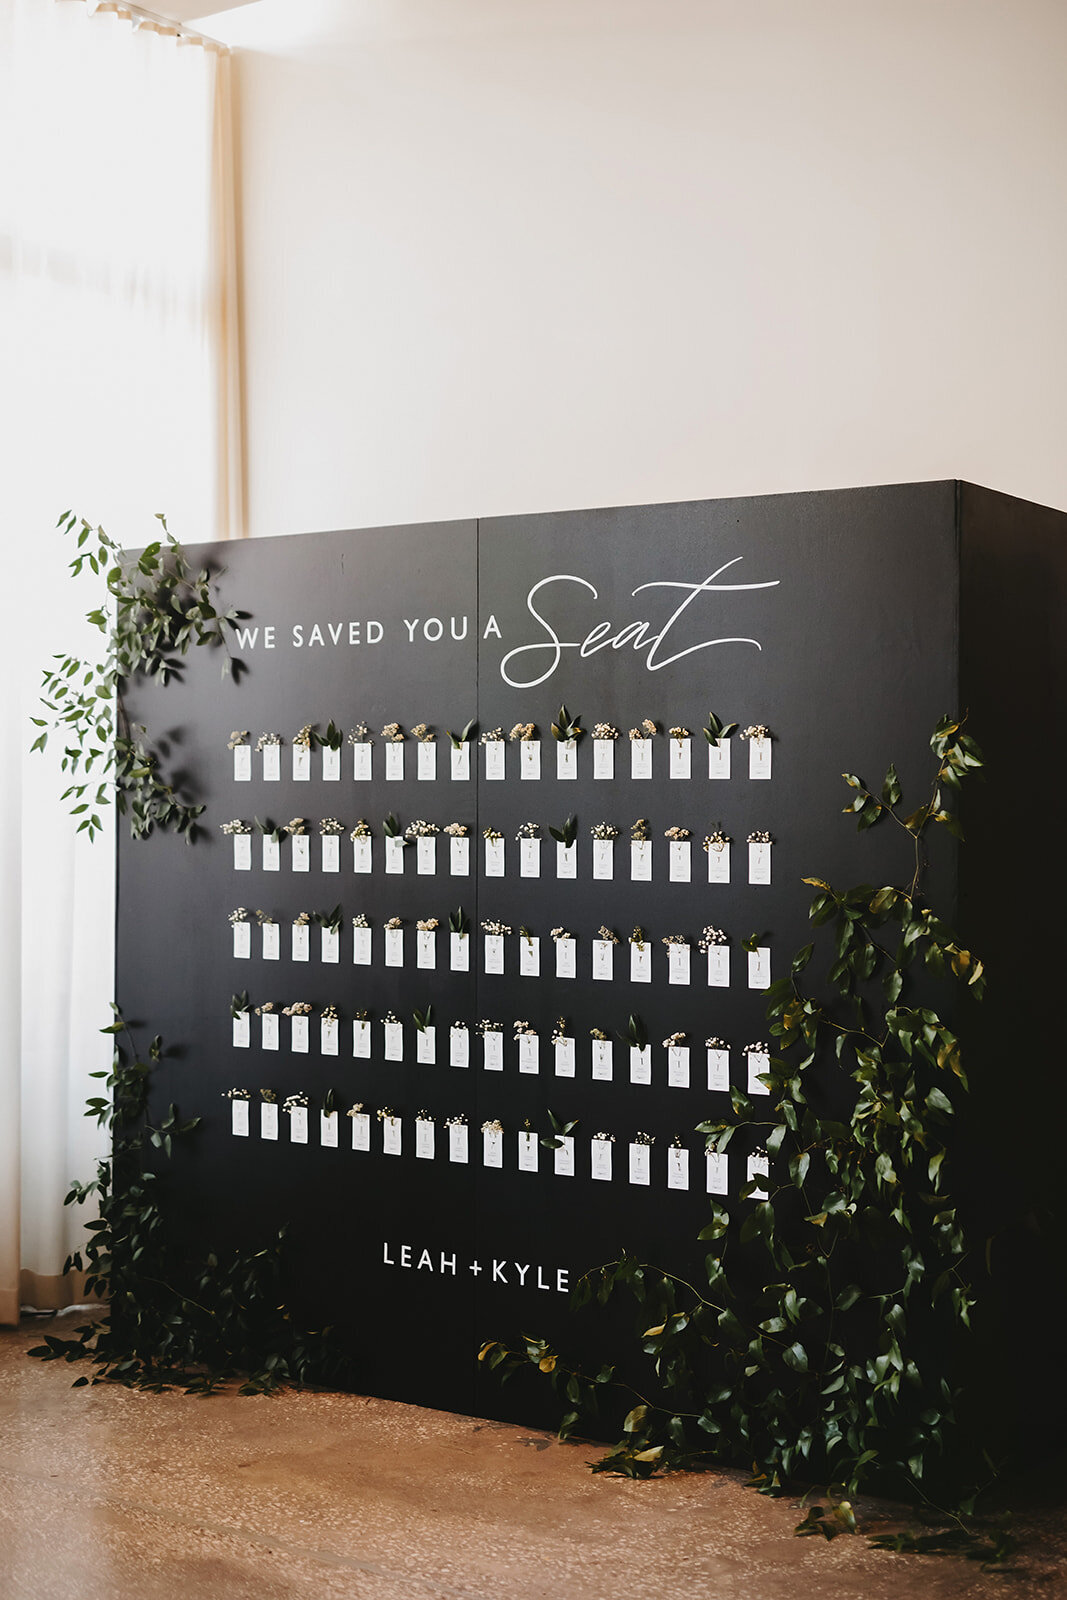 LBV Design House Wedding Design Planning Day-Of Signage Paper Goods Shoppable Accessories Wedding Day Austin, Texas beyond Valerie Strenk Lettered by Valerie Hand Lettering2